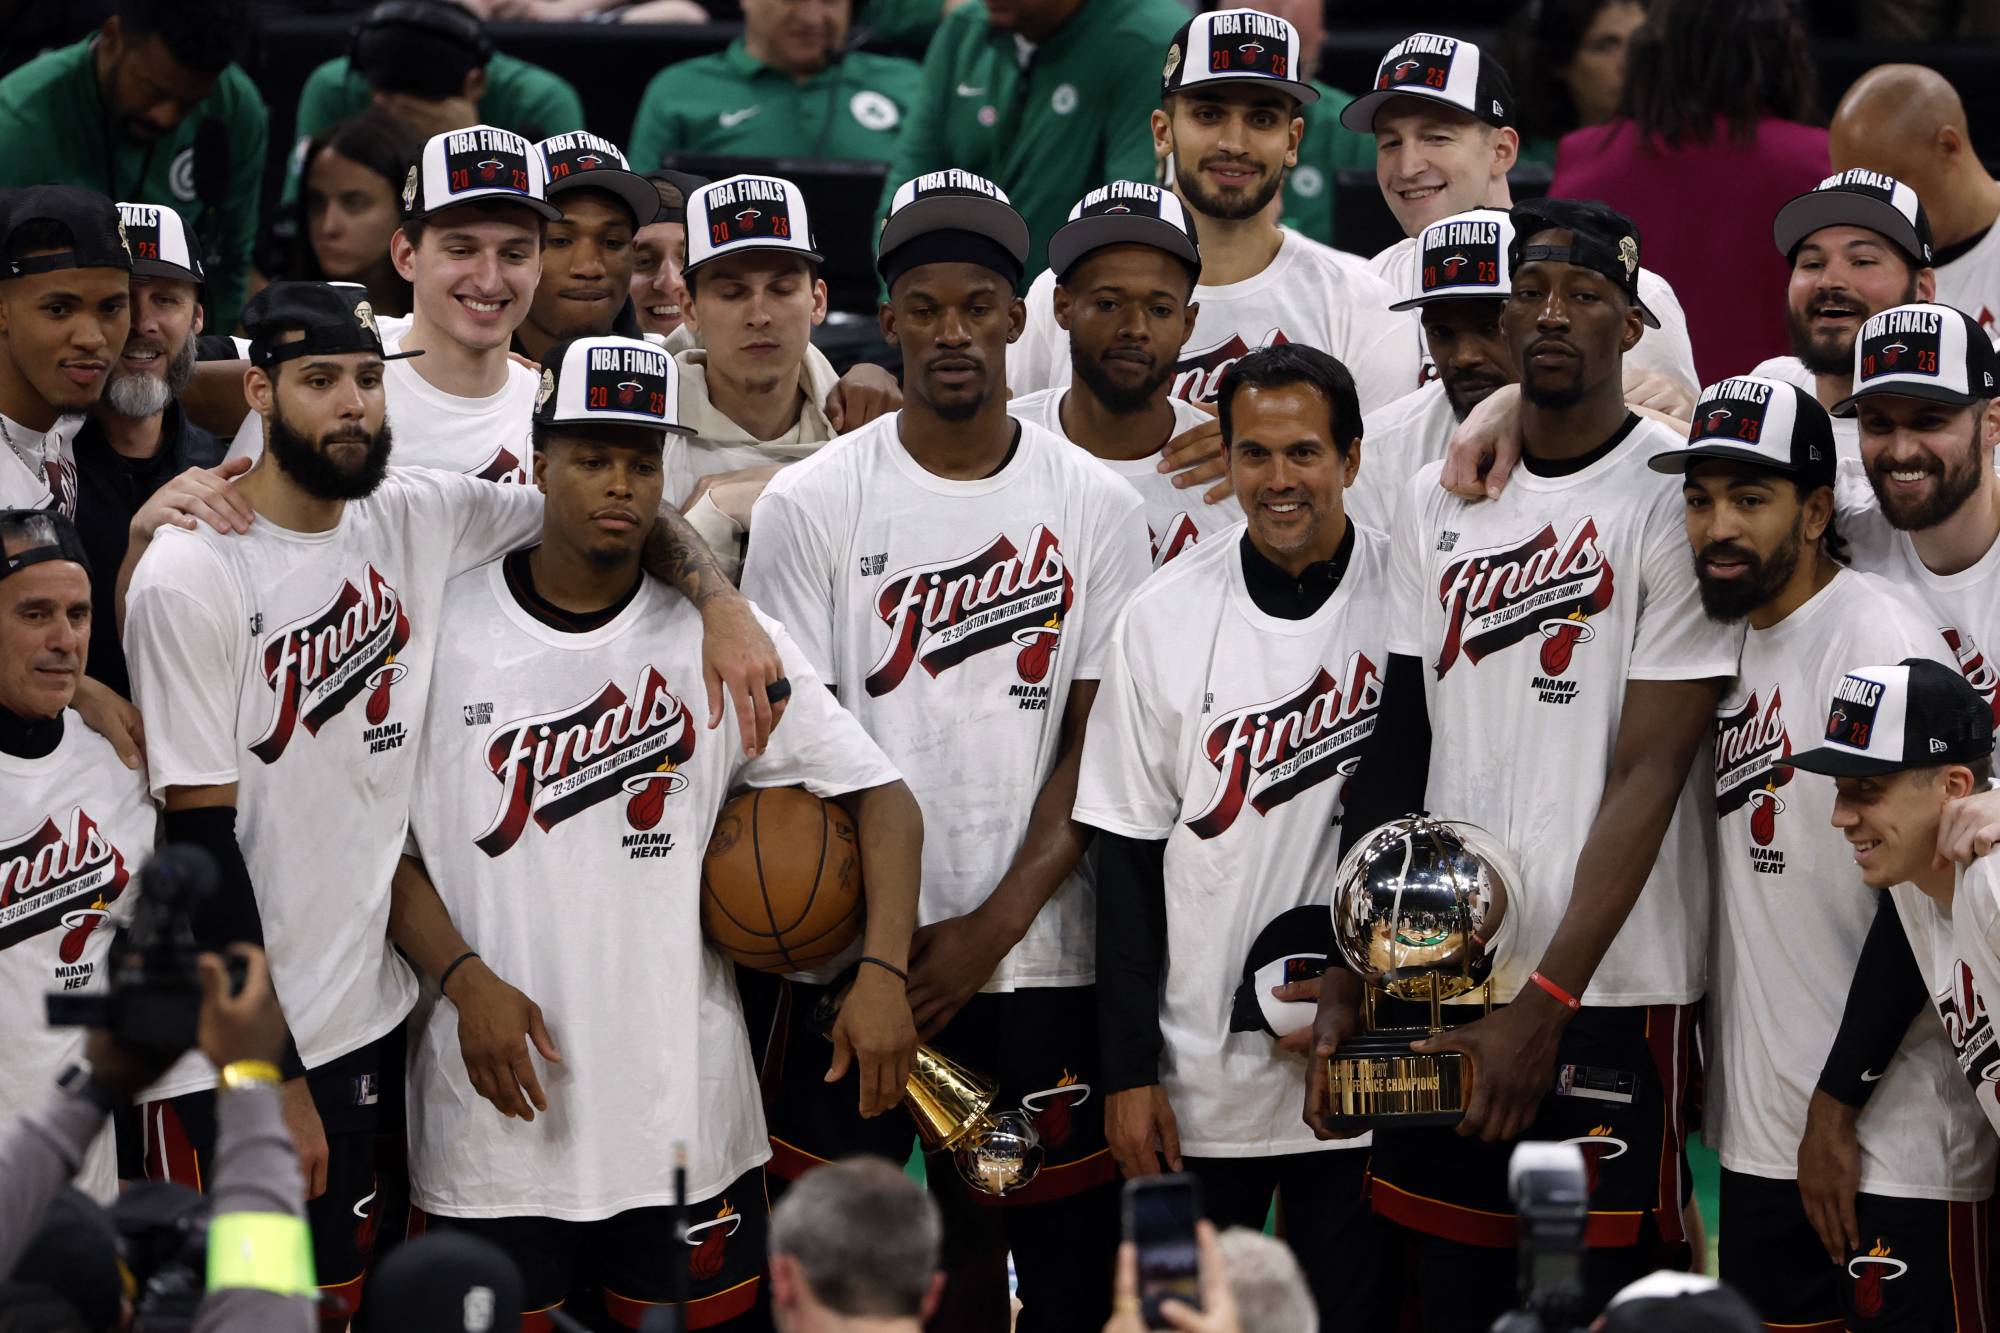 The Heat's Game 7 win against the Celtics in Boston on Monday sent the team to its second NBA Finals in four seasons. | USA TODAY / VIA REUTERS